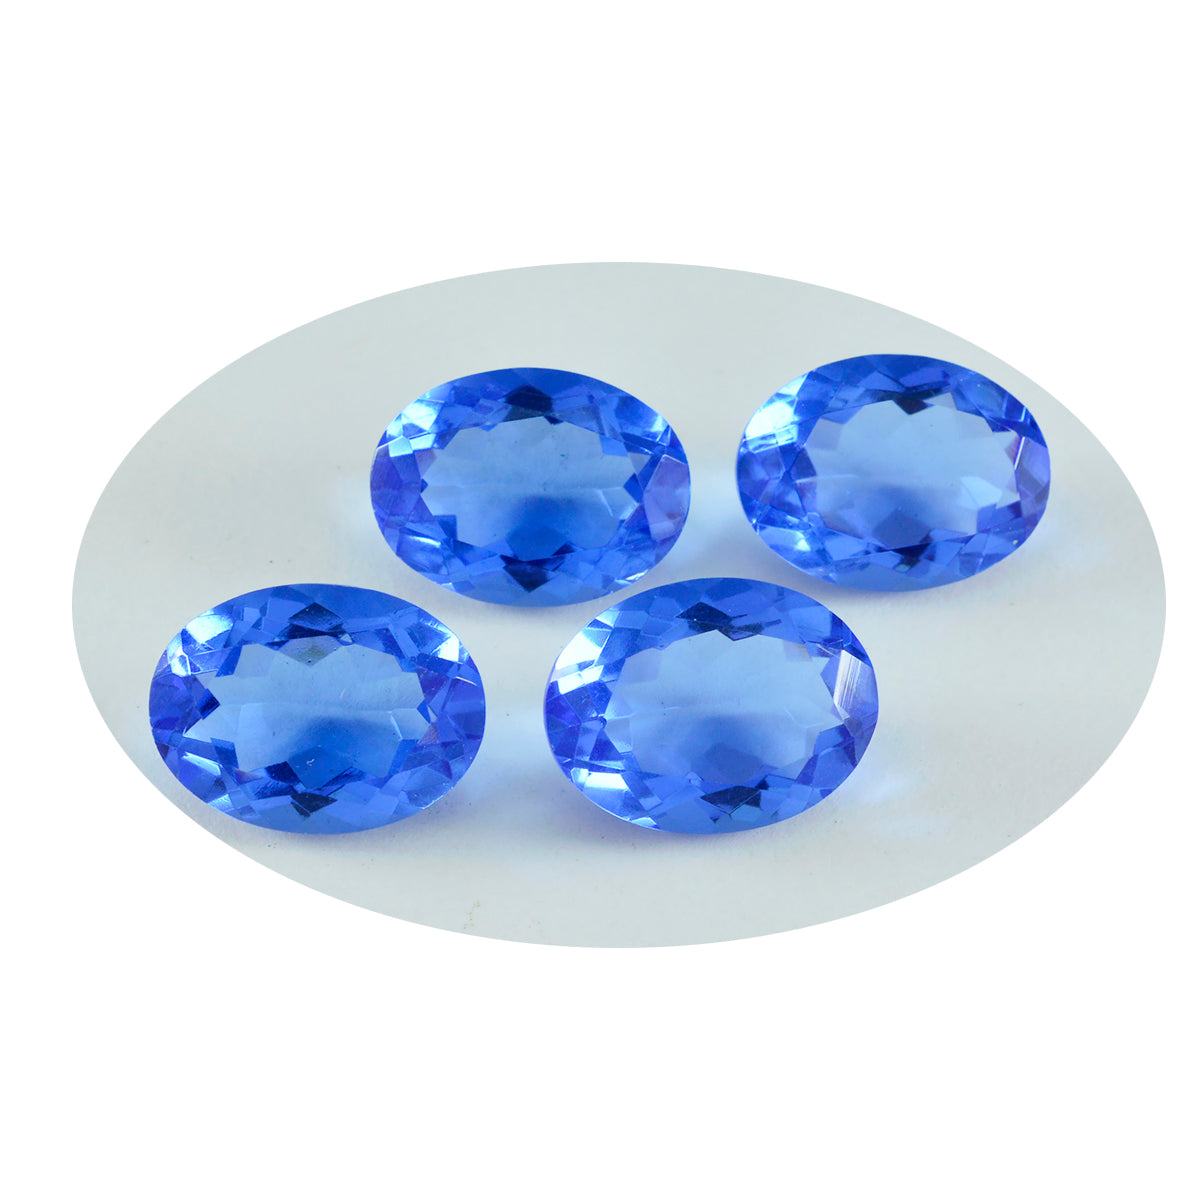 Riyogems 1PC Blue Sapphire CZ Faceted 10x14 mm Oval Shape attractive Quality Loose Gems